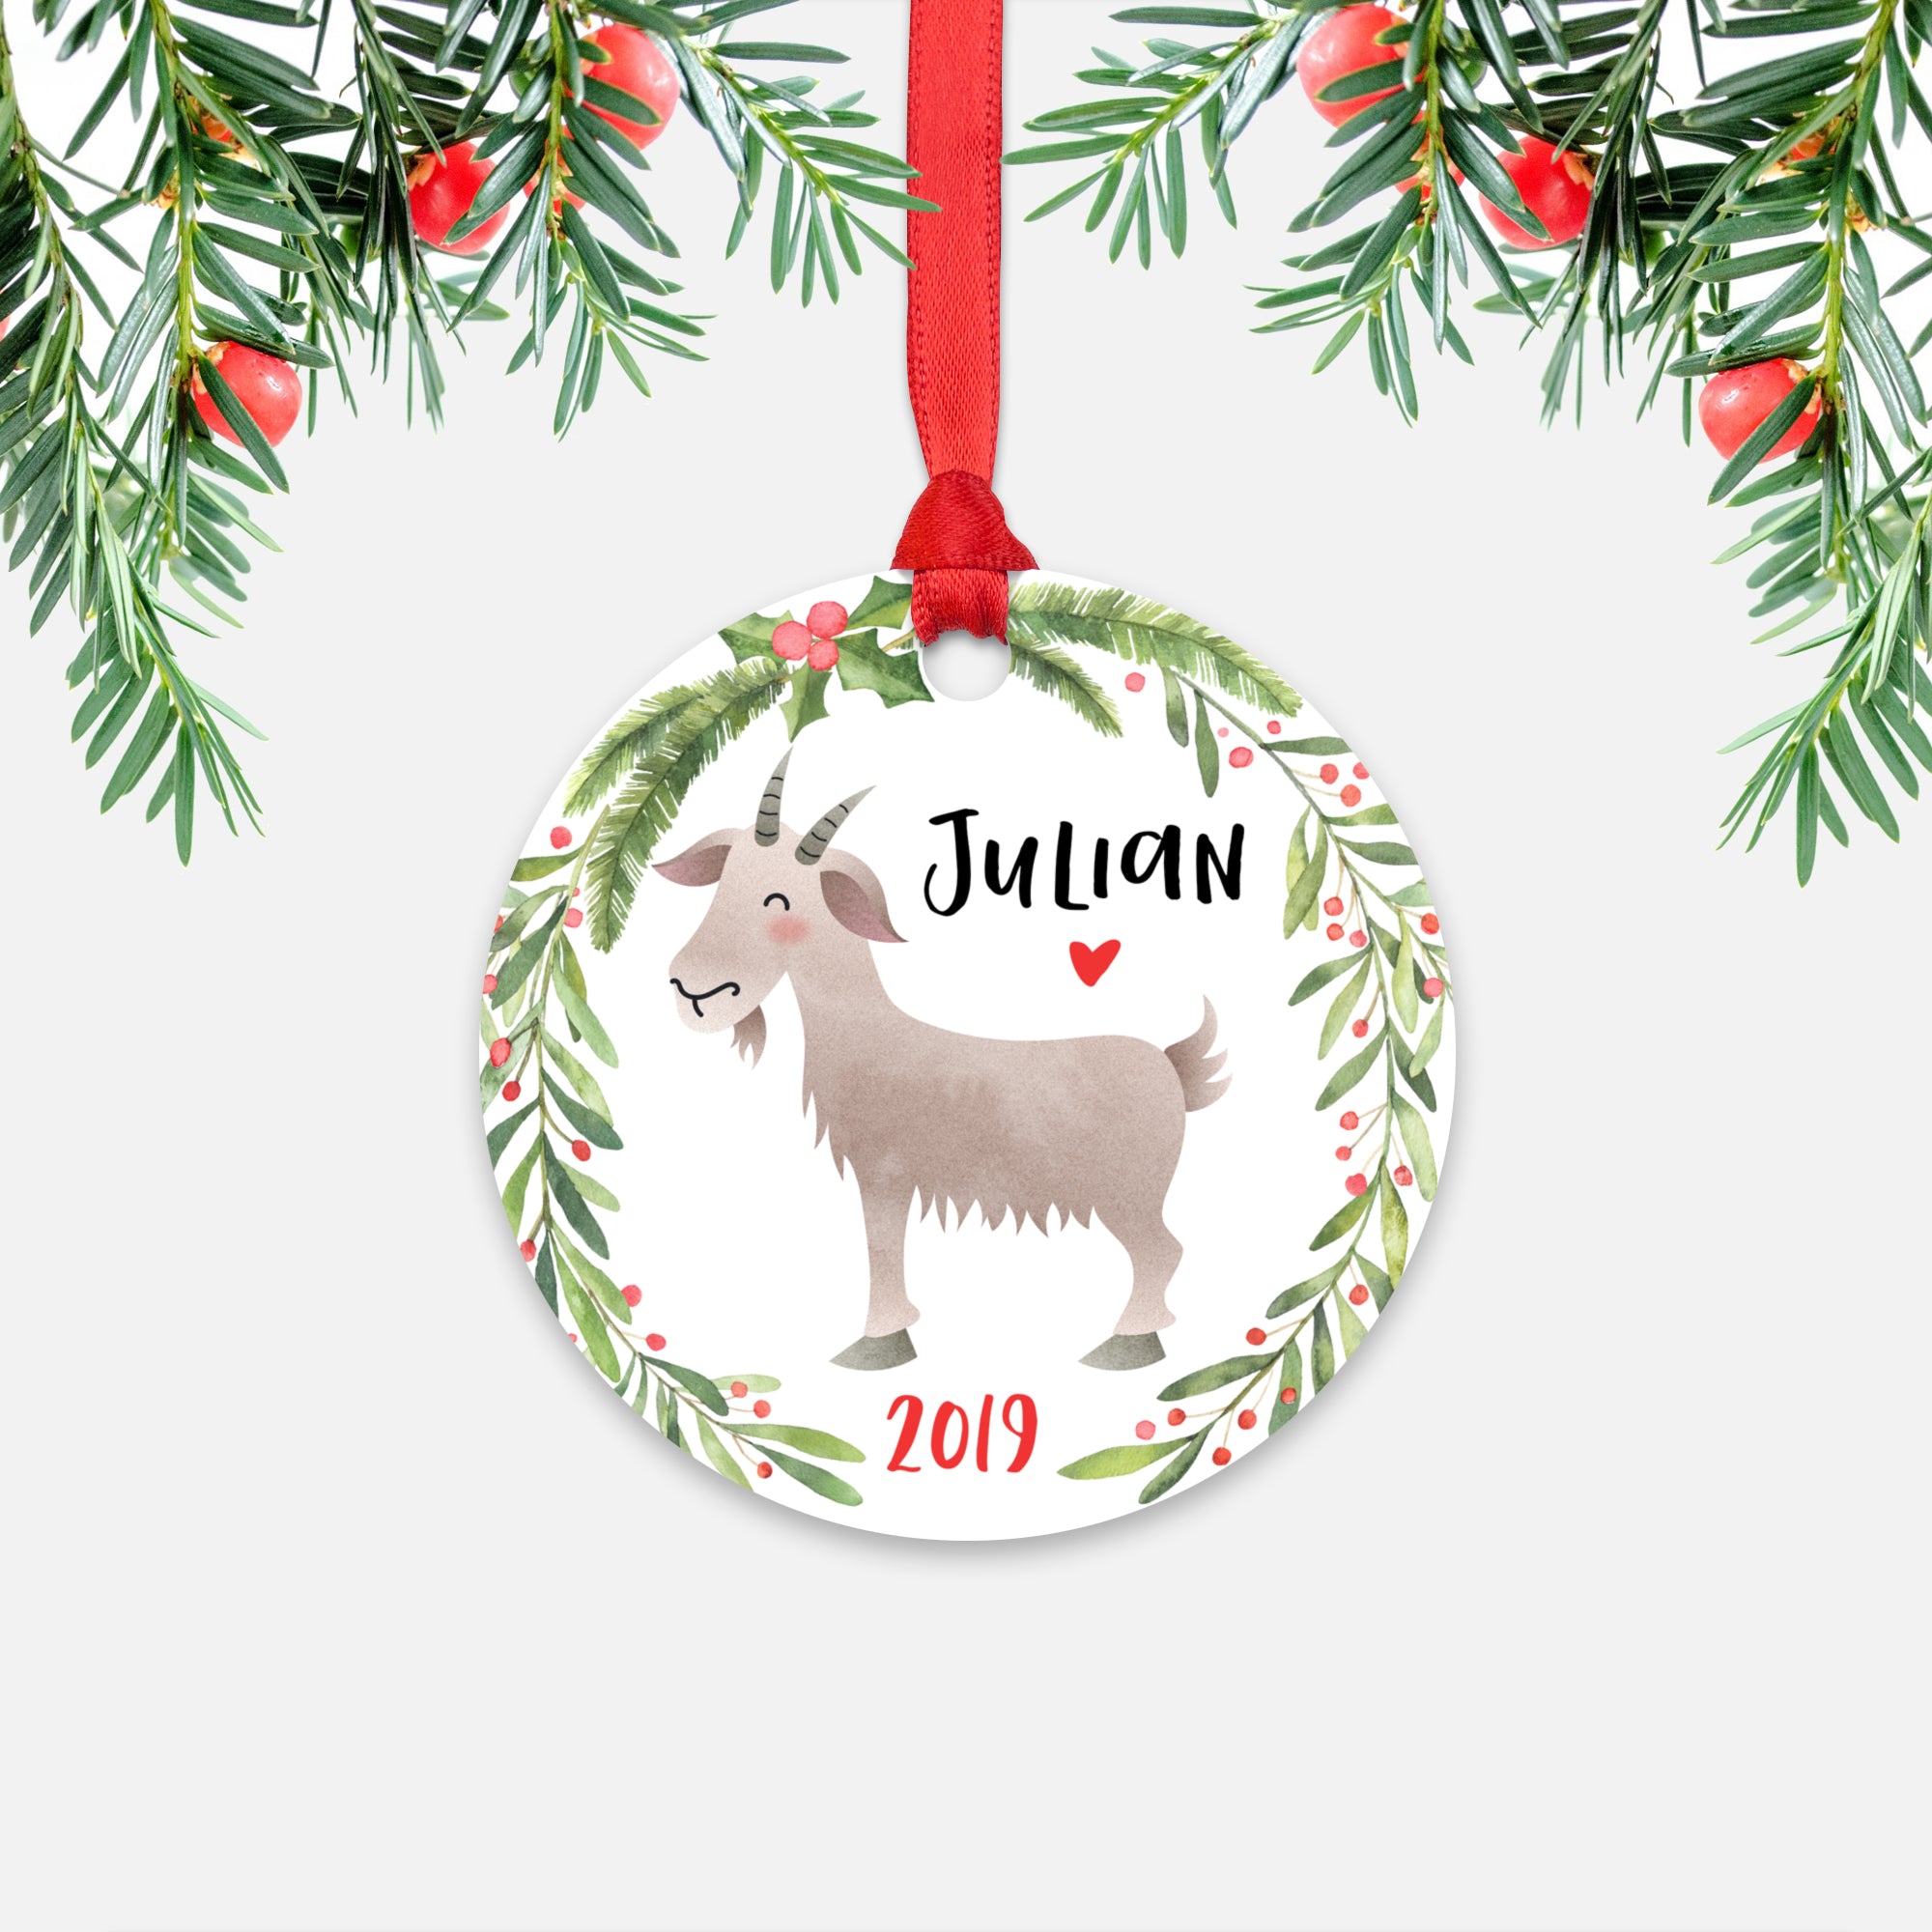 Goat Farm Animal Personalized Kids Name Christmas Ornament for Boy or Girl - Round Aluminum - Red ribbon